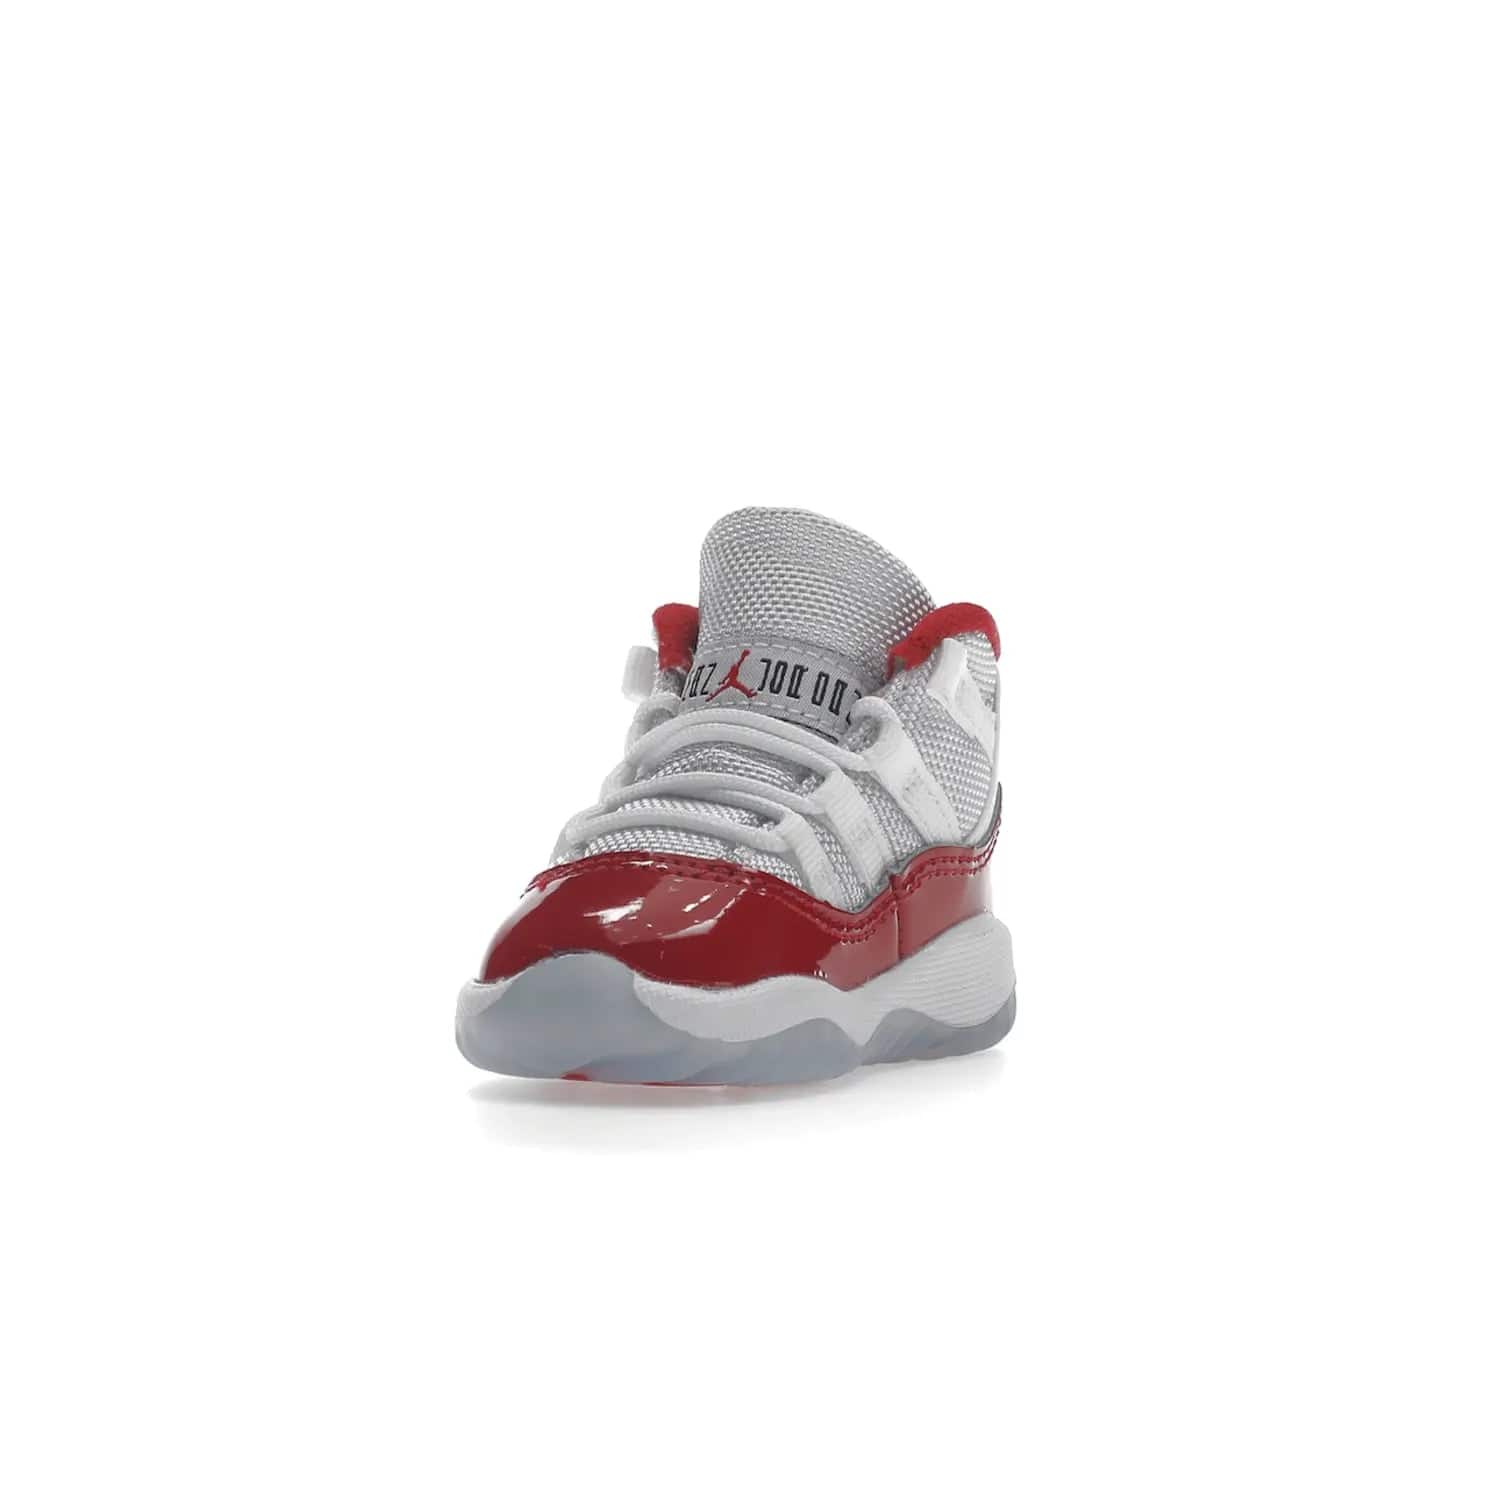 Jordan 11 Retro Cherry (2022) (TD) - Image 13 - Only at www.BallersClubKickz.com - Timeless classic. Air Jordan 11 Retro Cherry 2022 TD combines mesh, leather & suede for a unique look. White upper with varsity red suede. Jumpman logo on collar & tongue. Available Dec 10th, priced at $80.